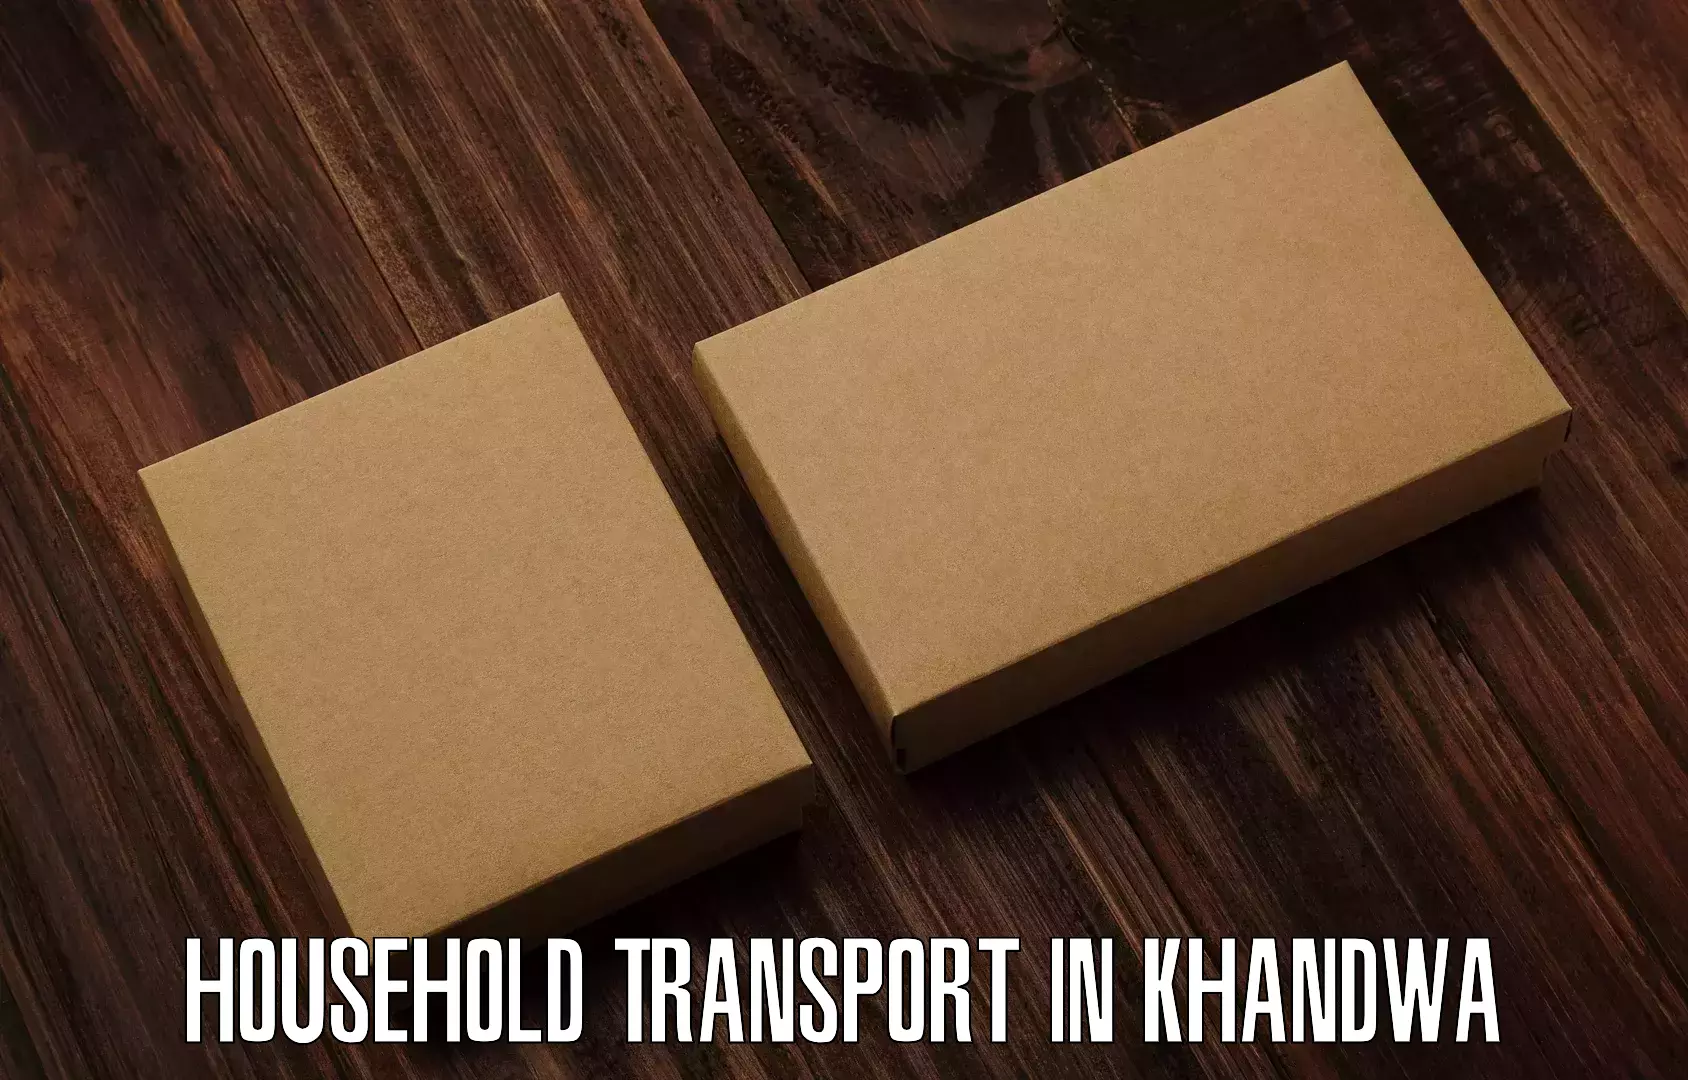 Long-distance household transport in Khandwa